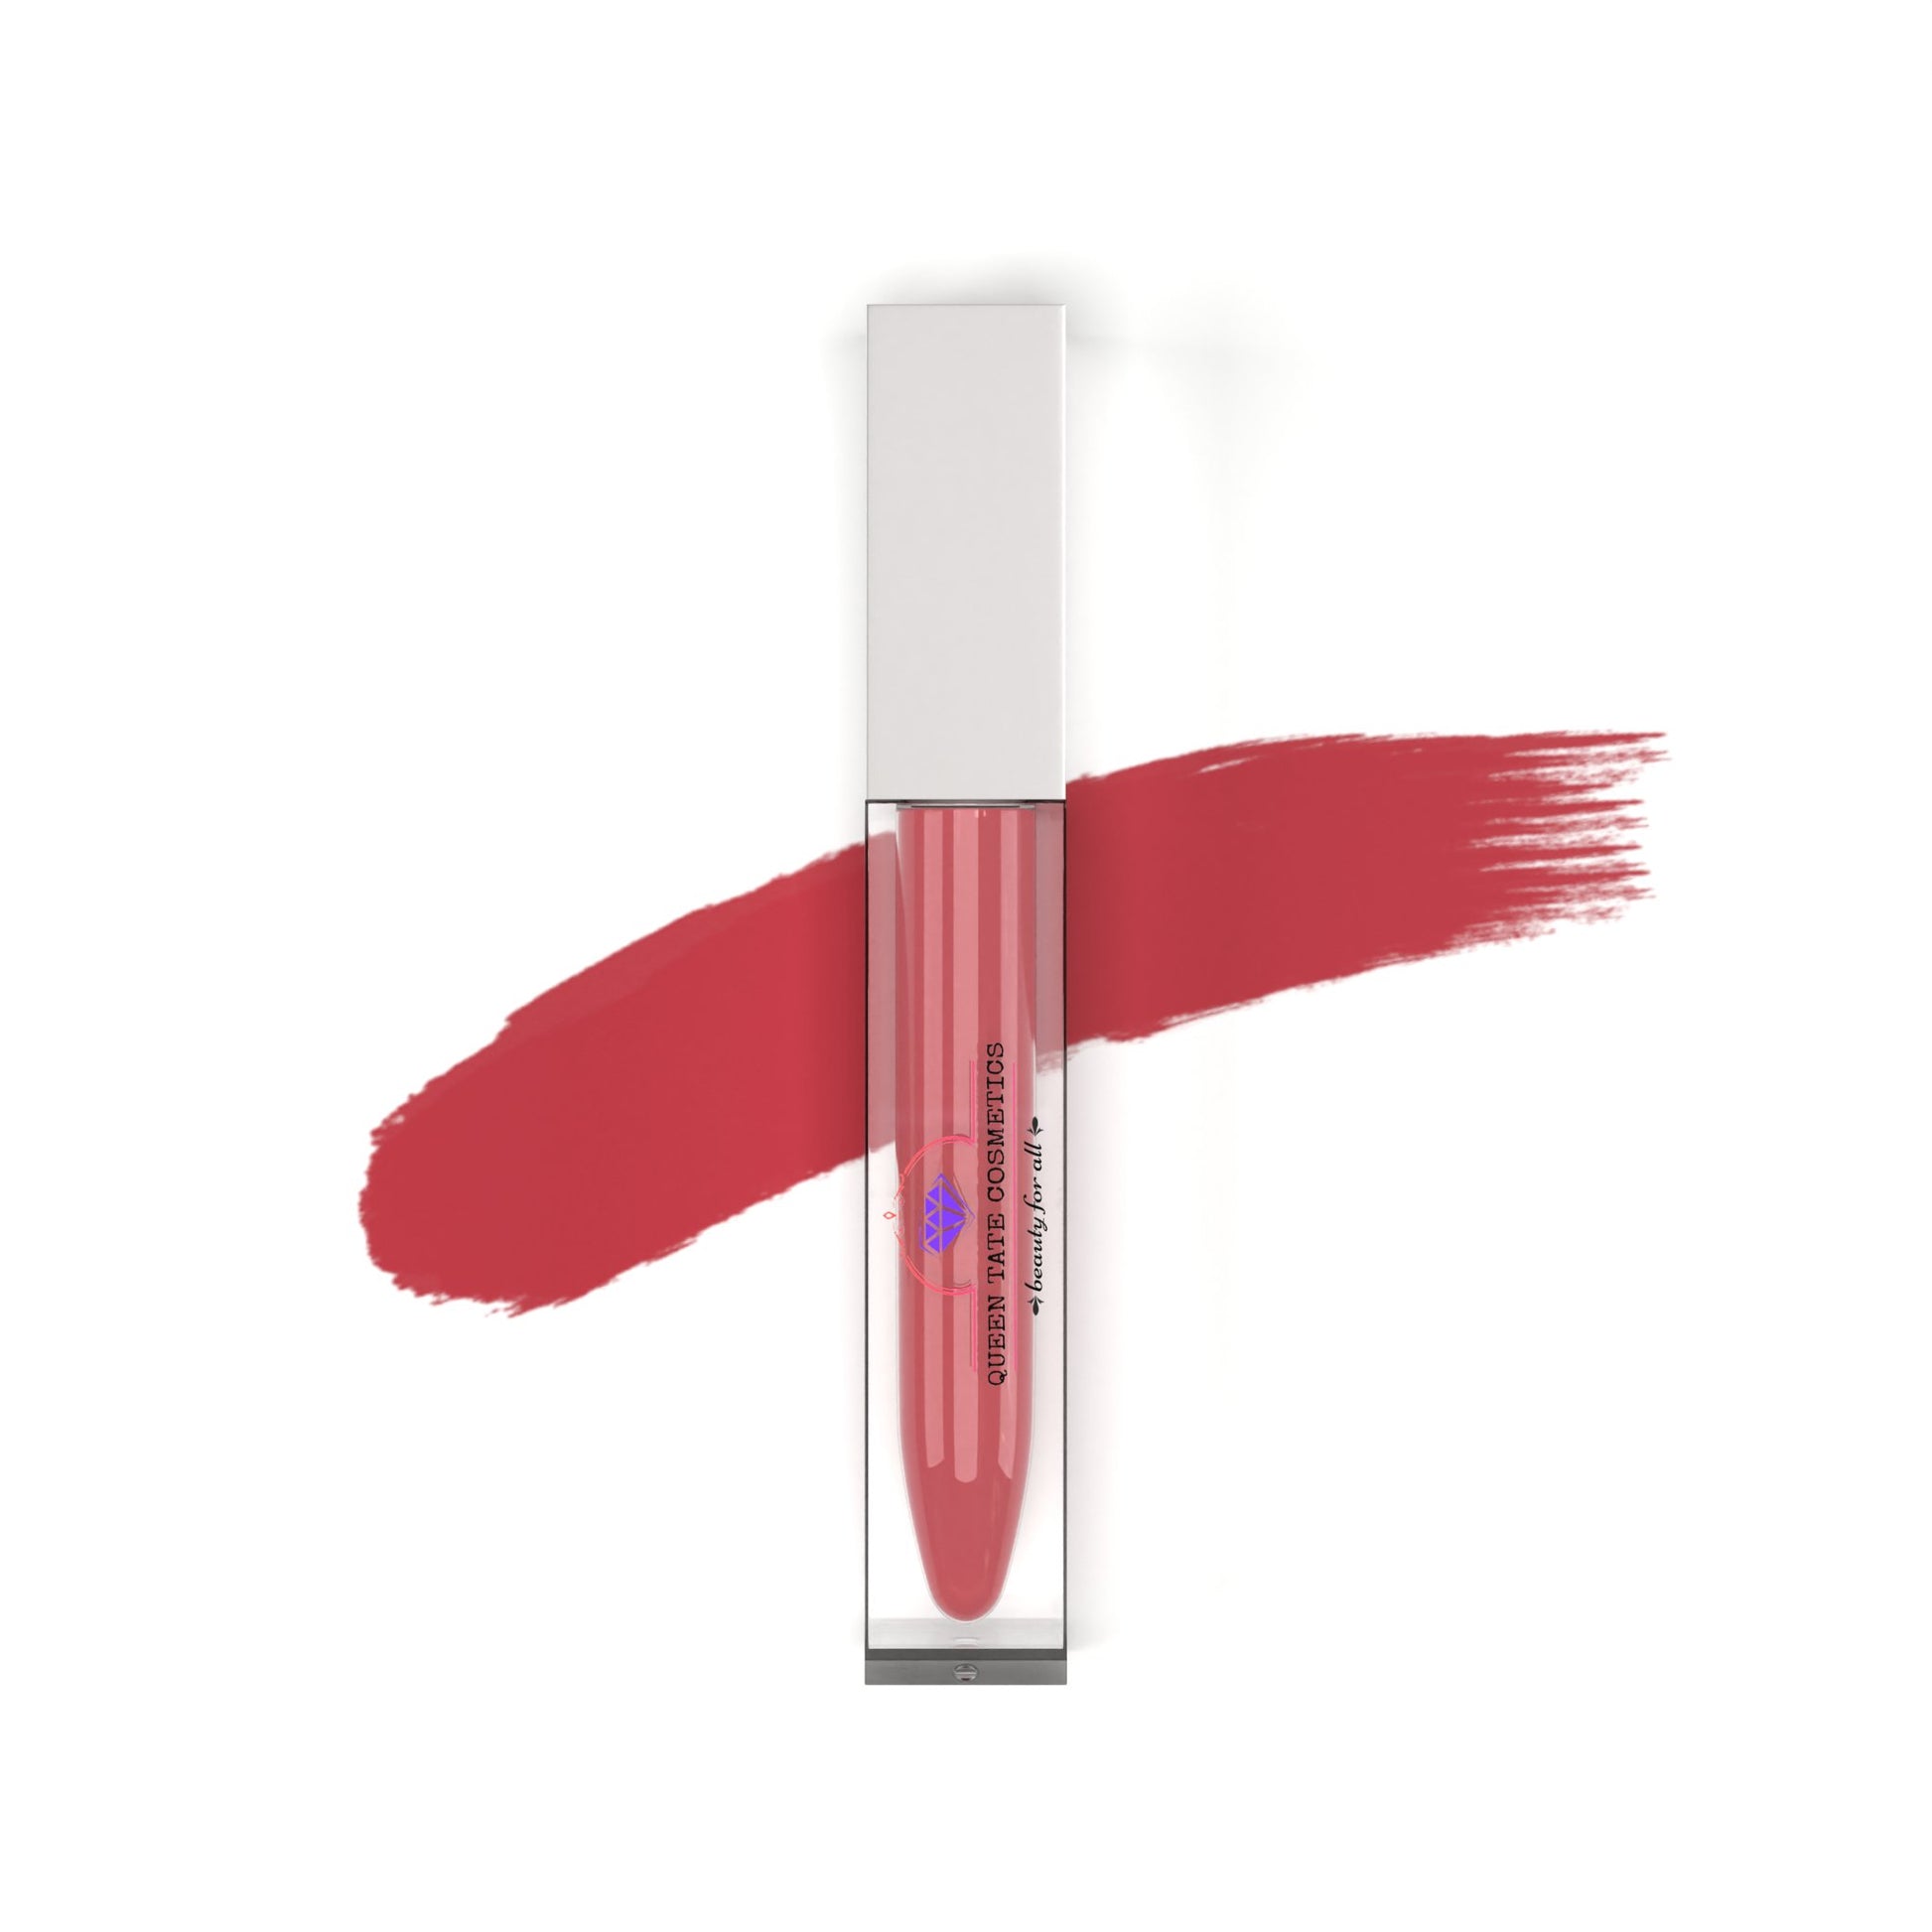 Non-Sticky Red Lip Gloss- "Don’t Be Shy" - Queen Tate CosmeticsNon-Sticky Lip GlossNon-Sticky Red Lip Gloss- "Don’t Be Shy"Non-Sticky Lip GlossQueen Tate Cosmetics